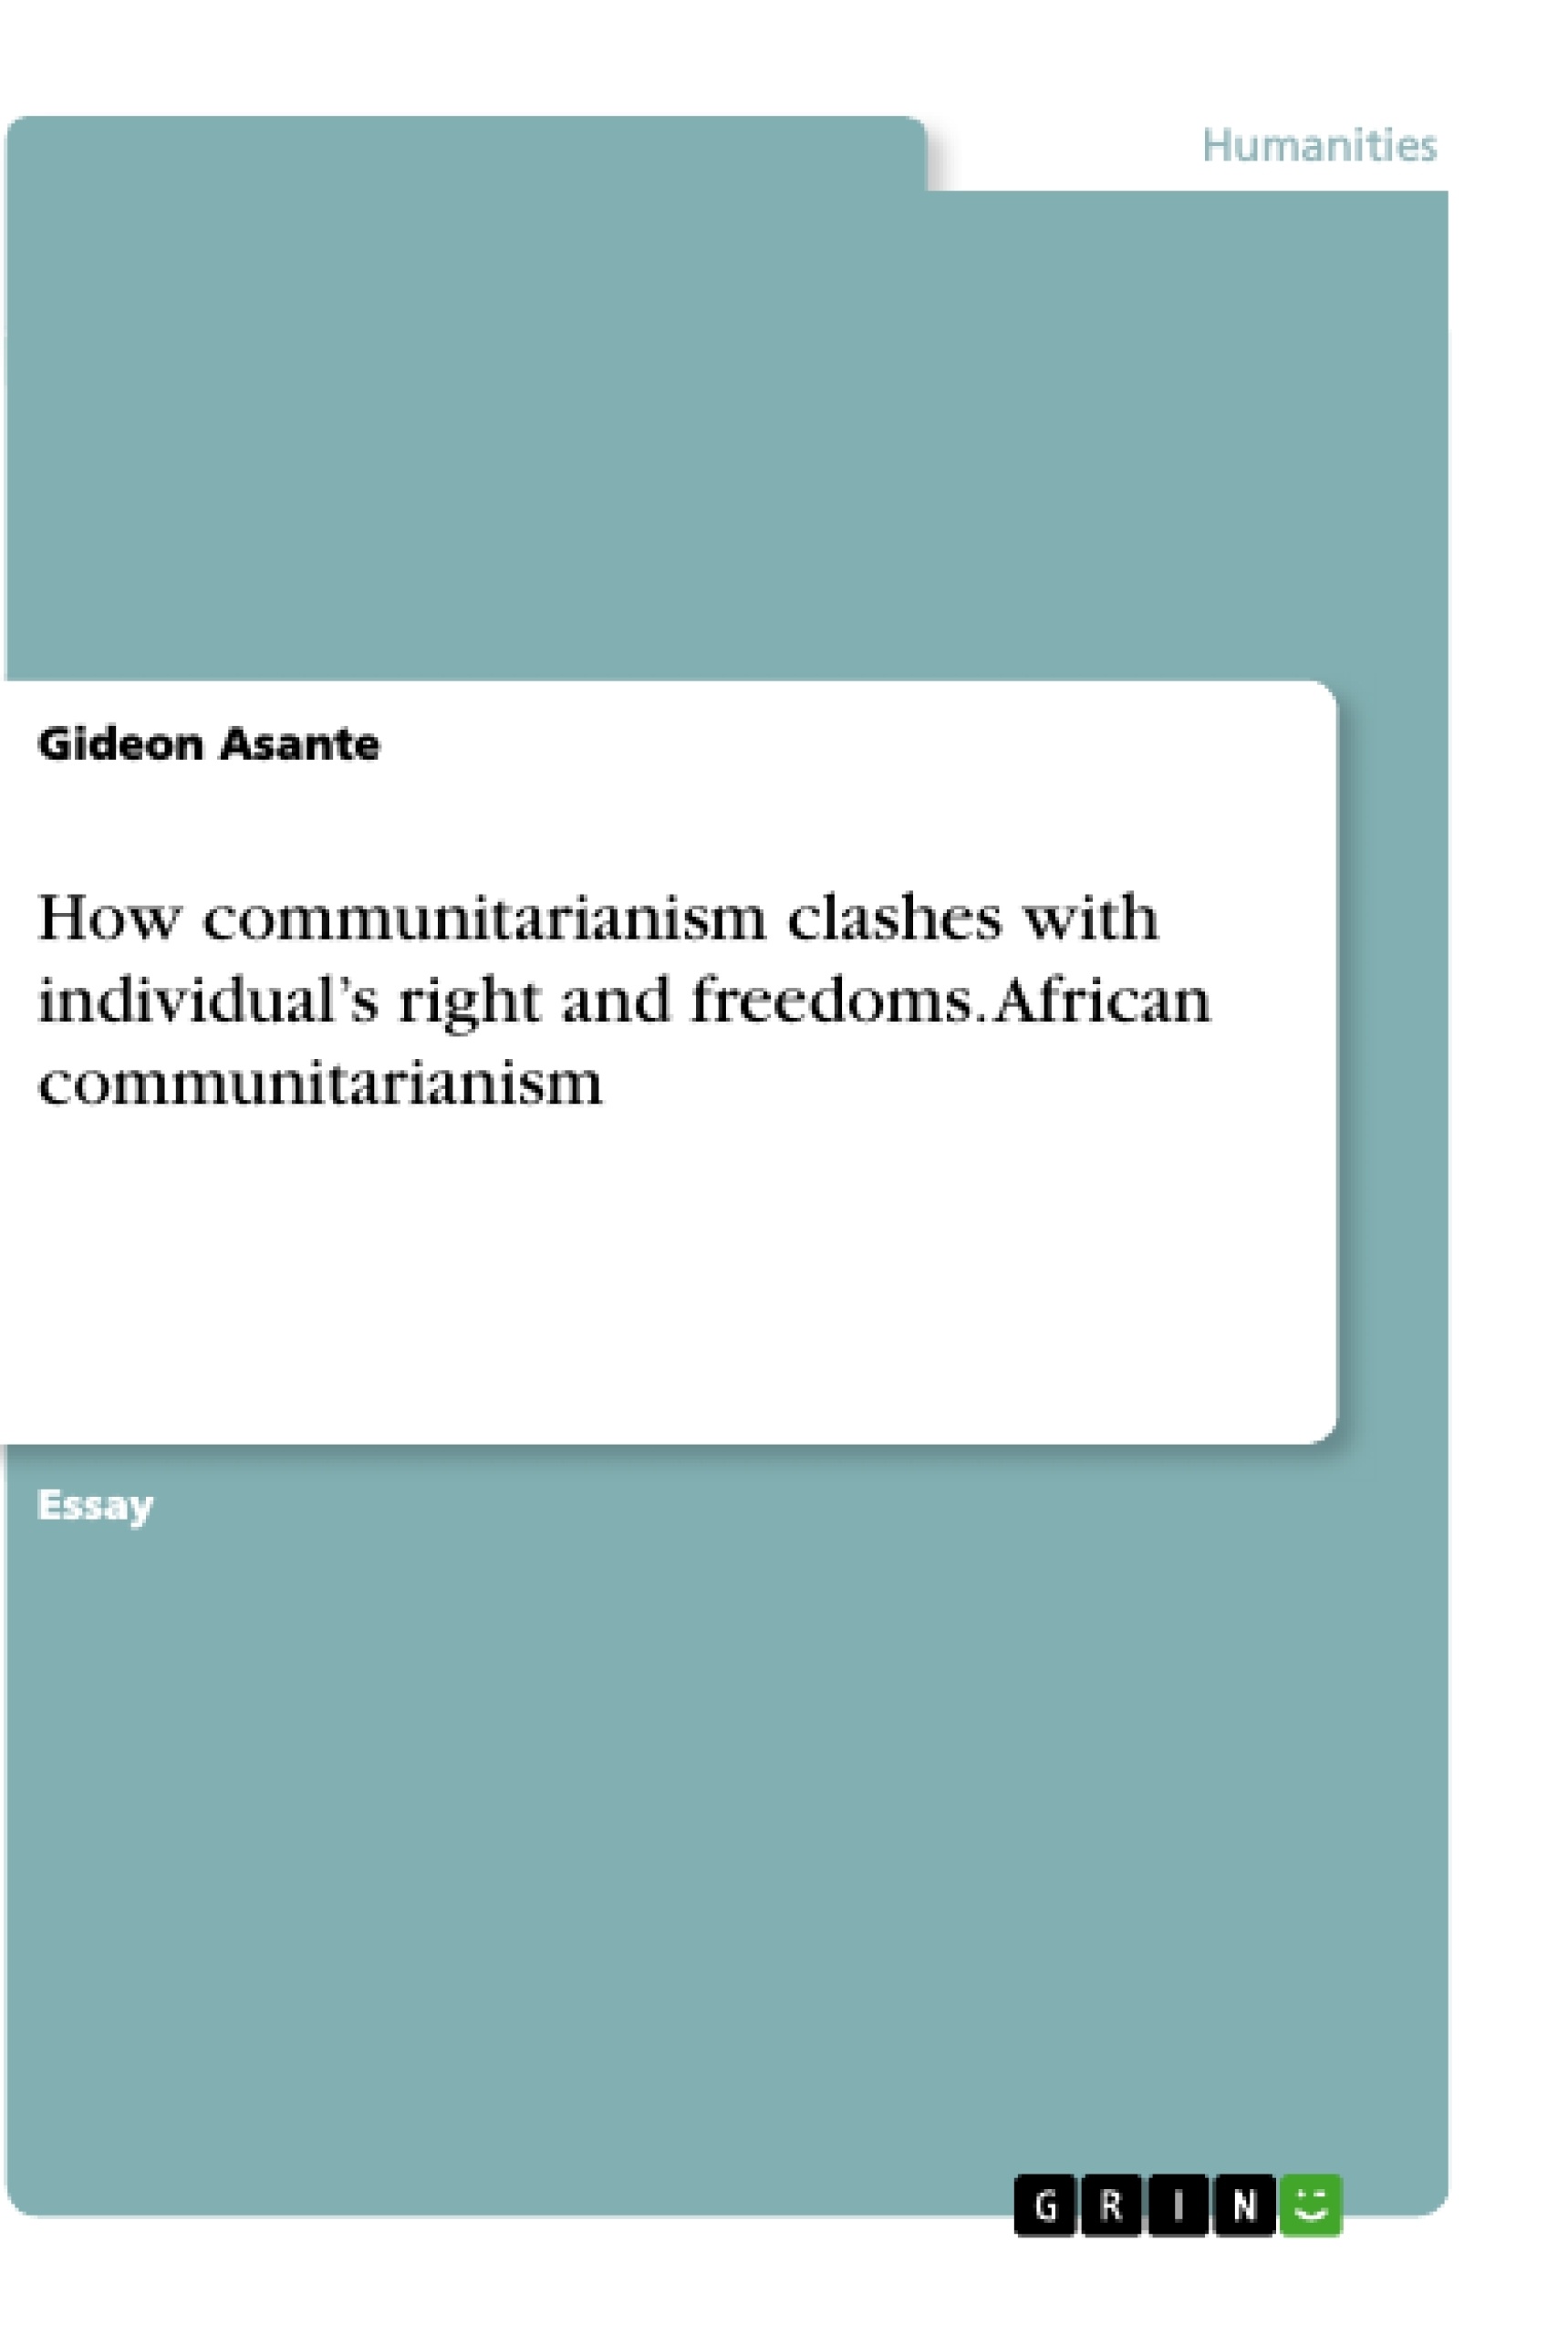 Title: How communitarianism clashes with individual’s right and freedoms. African communitarianism